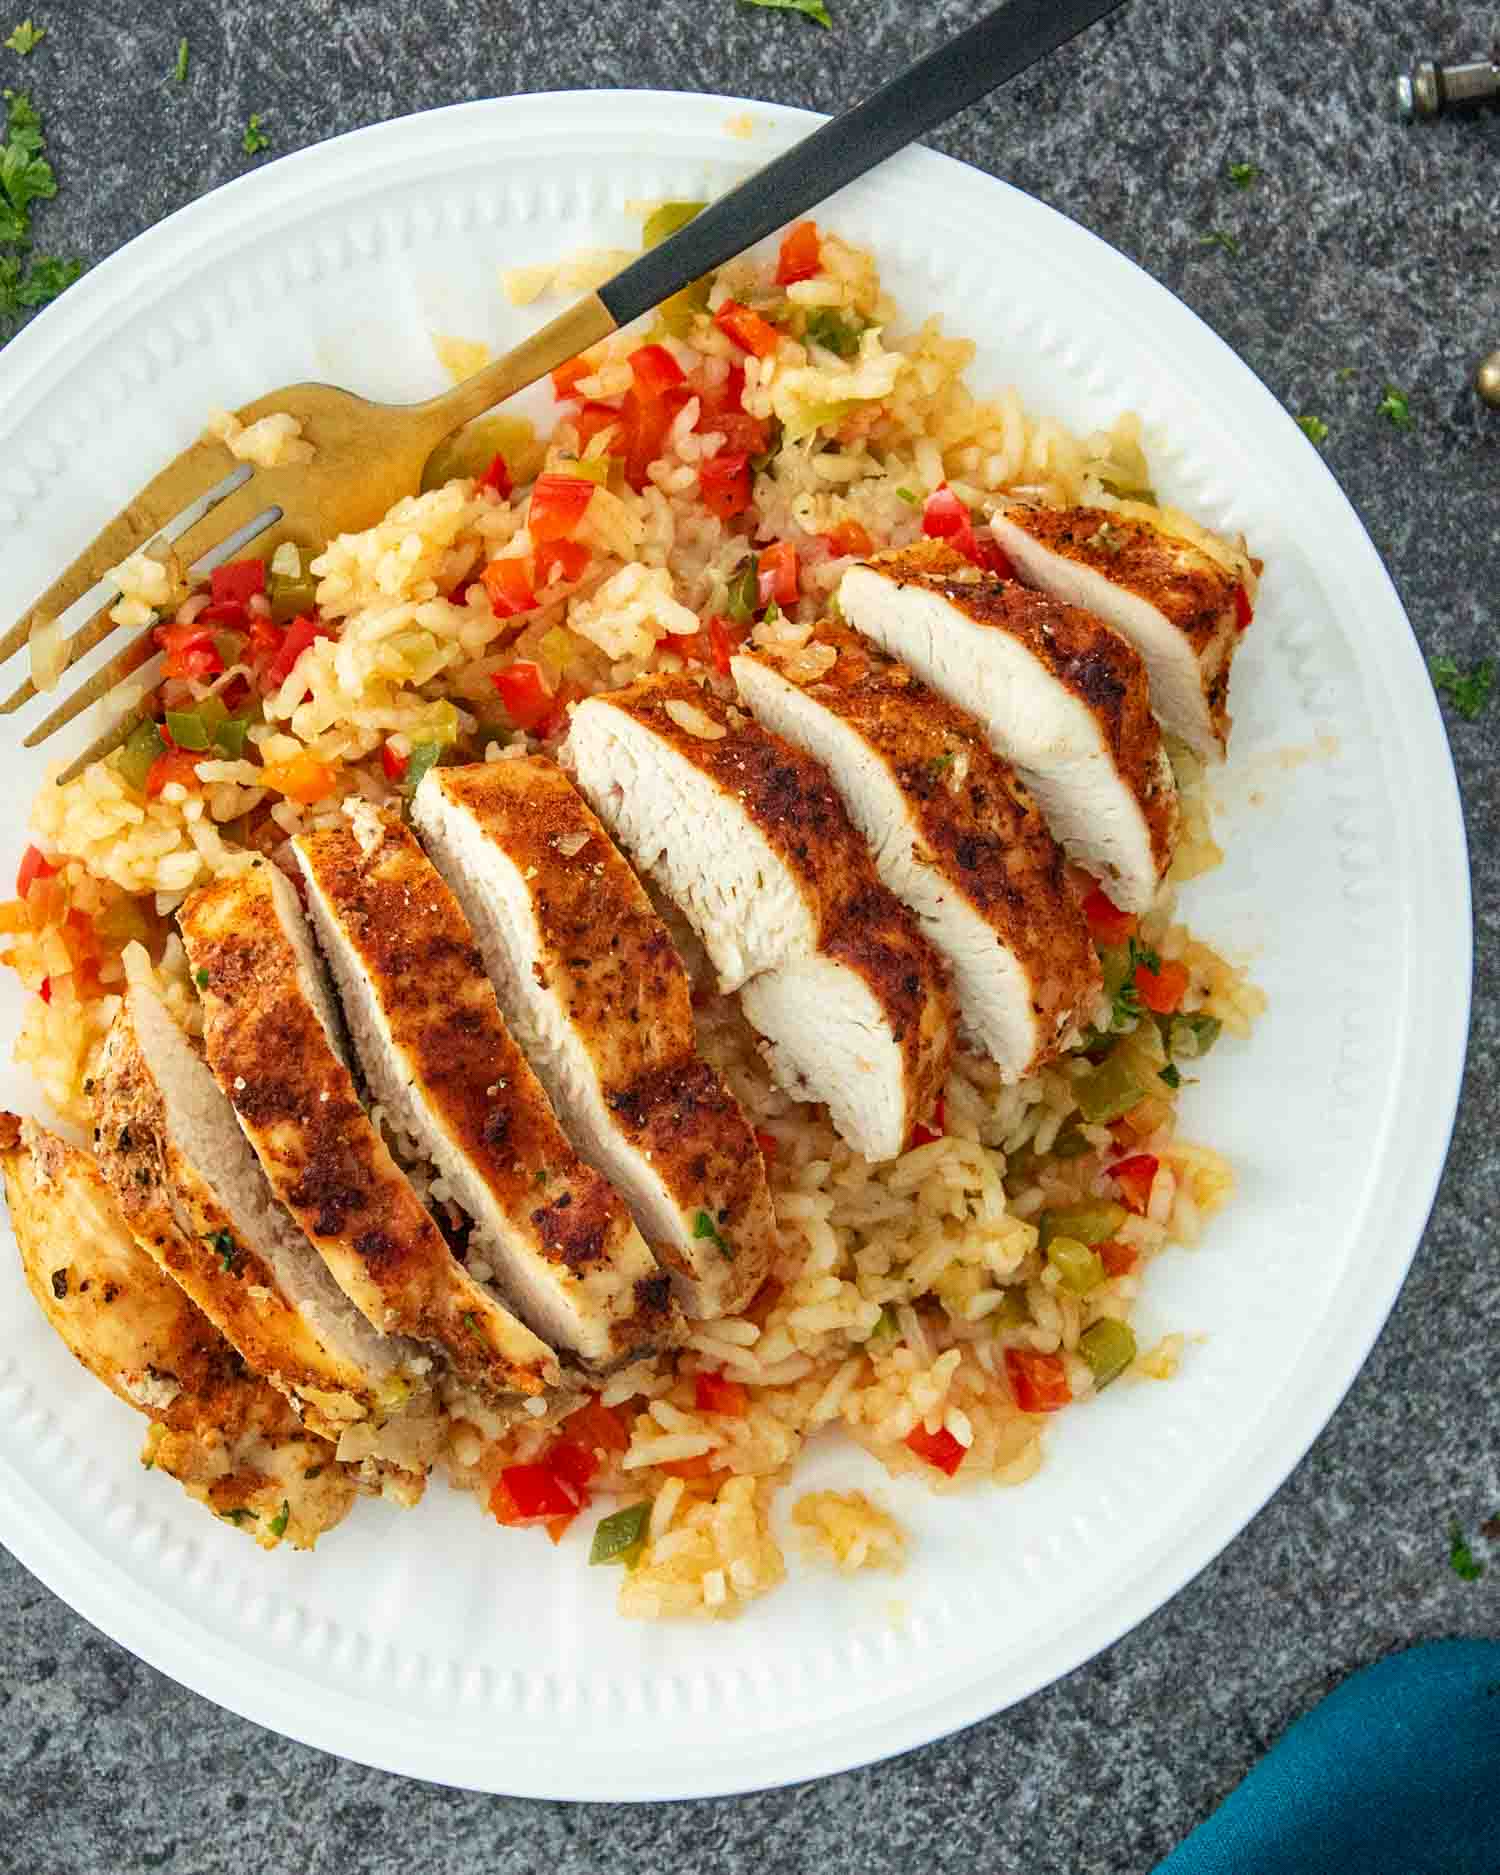 a cajun chicken breast and cajun rice on a plate.